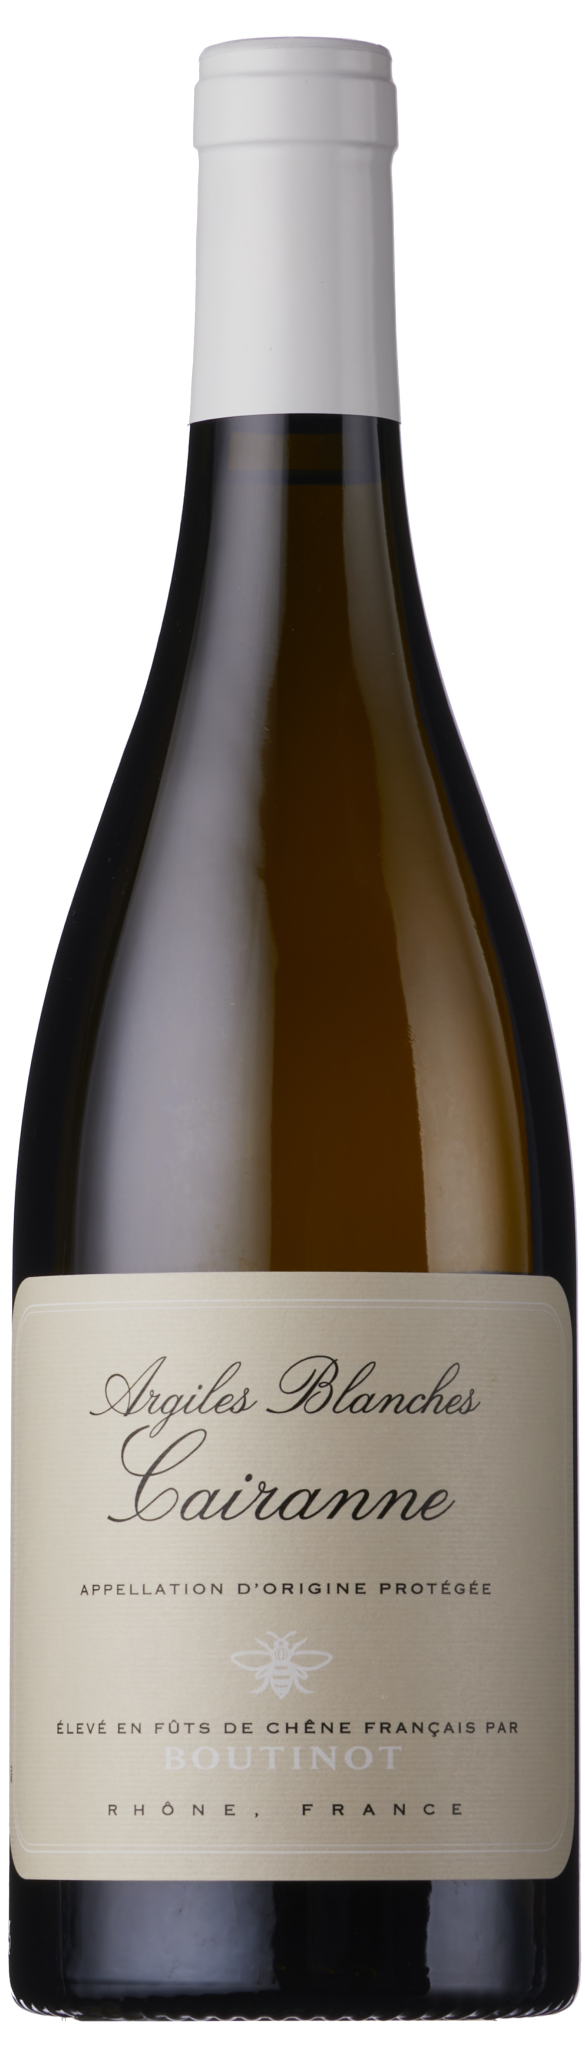 Boutinot ‘Argiles Blanches’ Cairanne Blanc